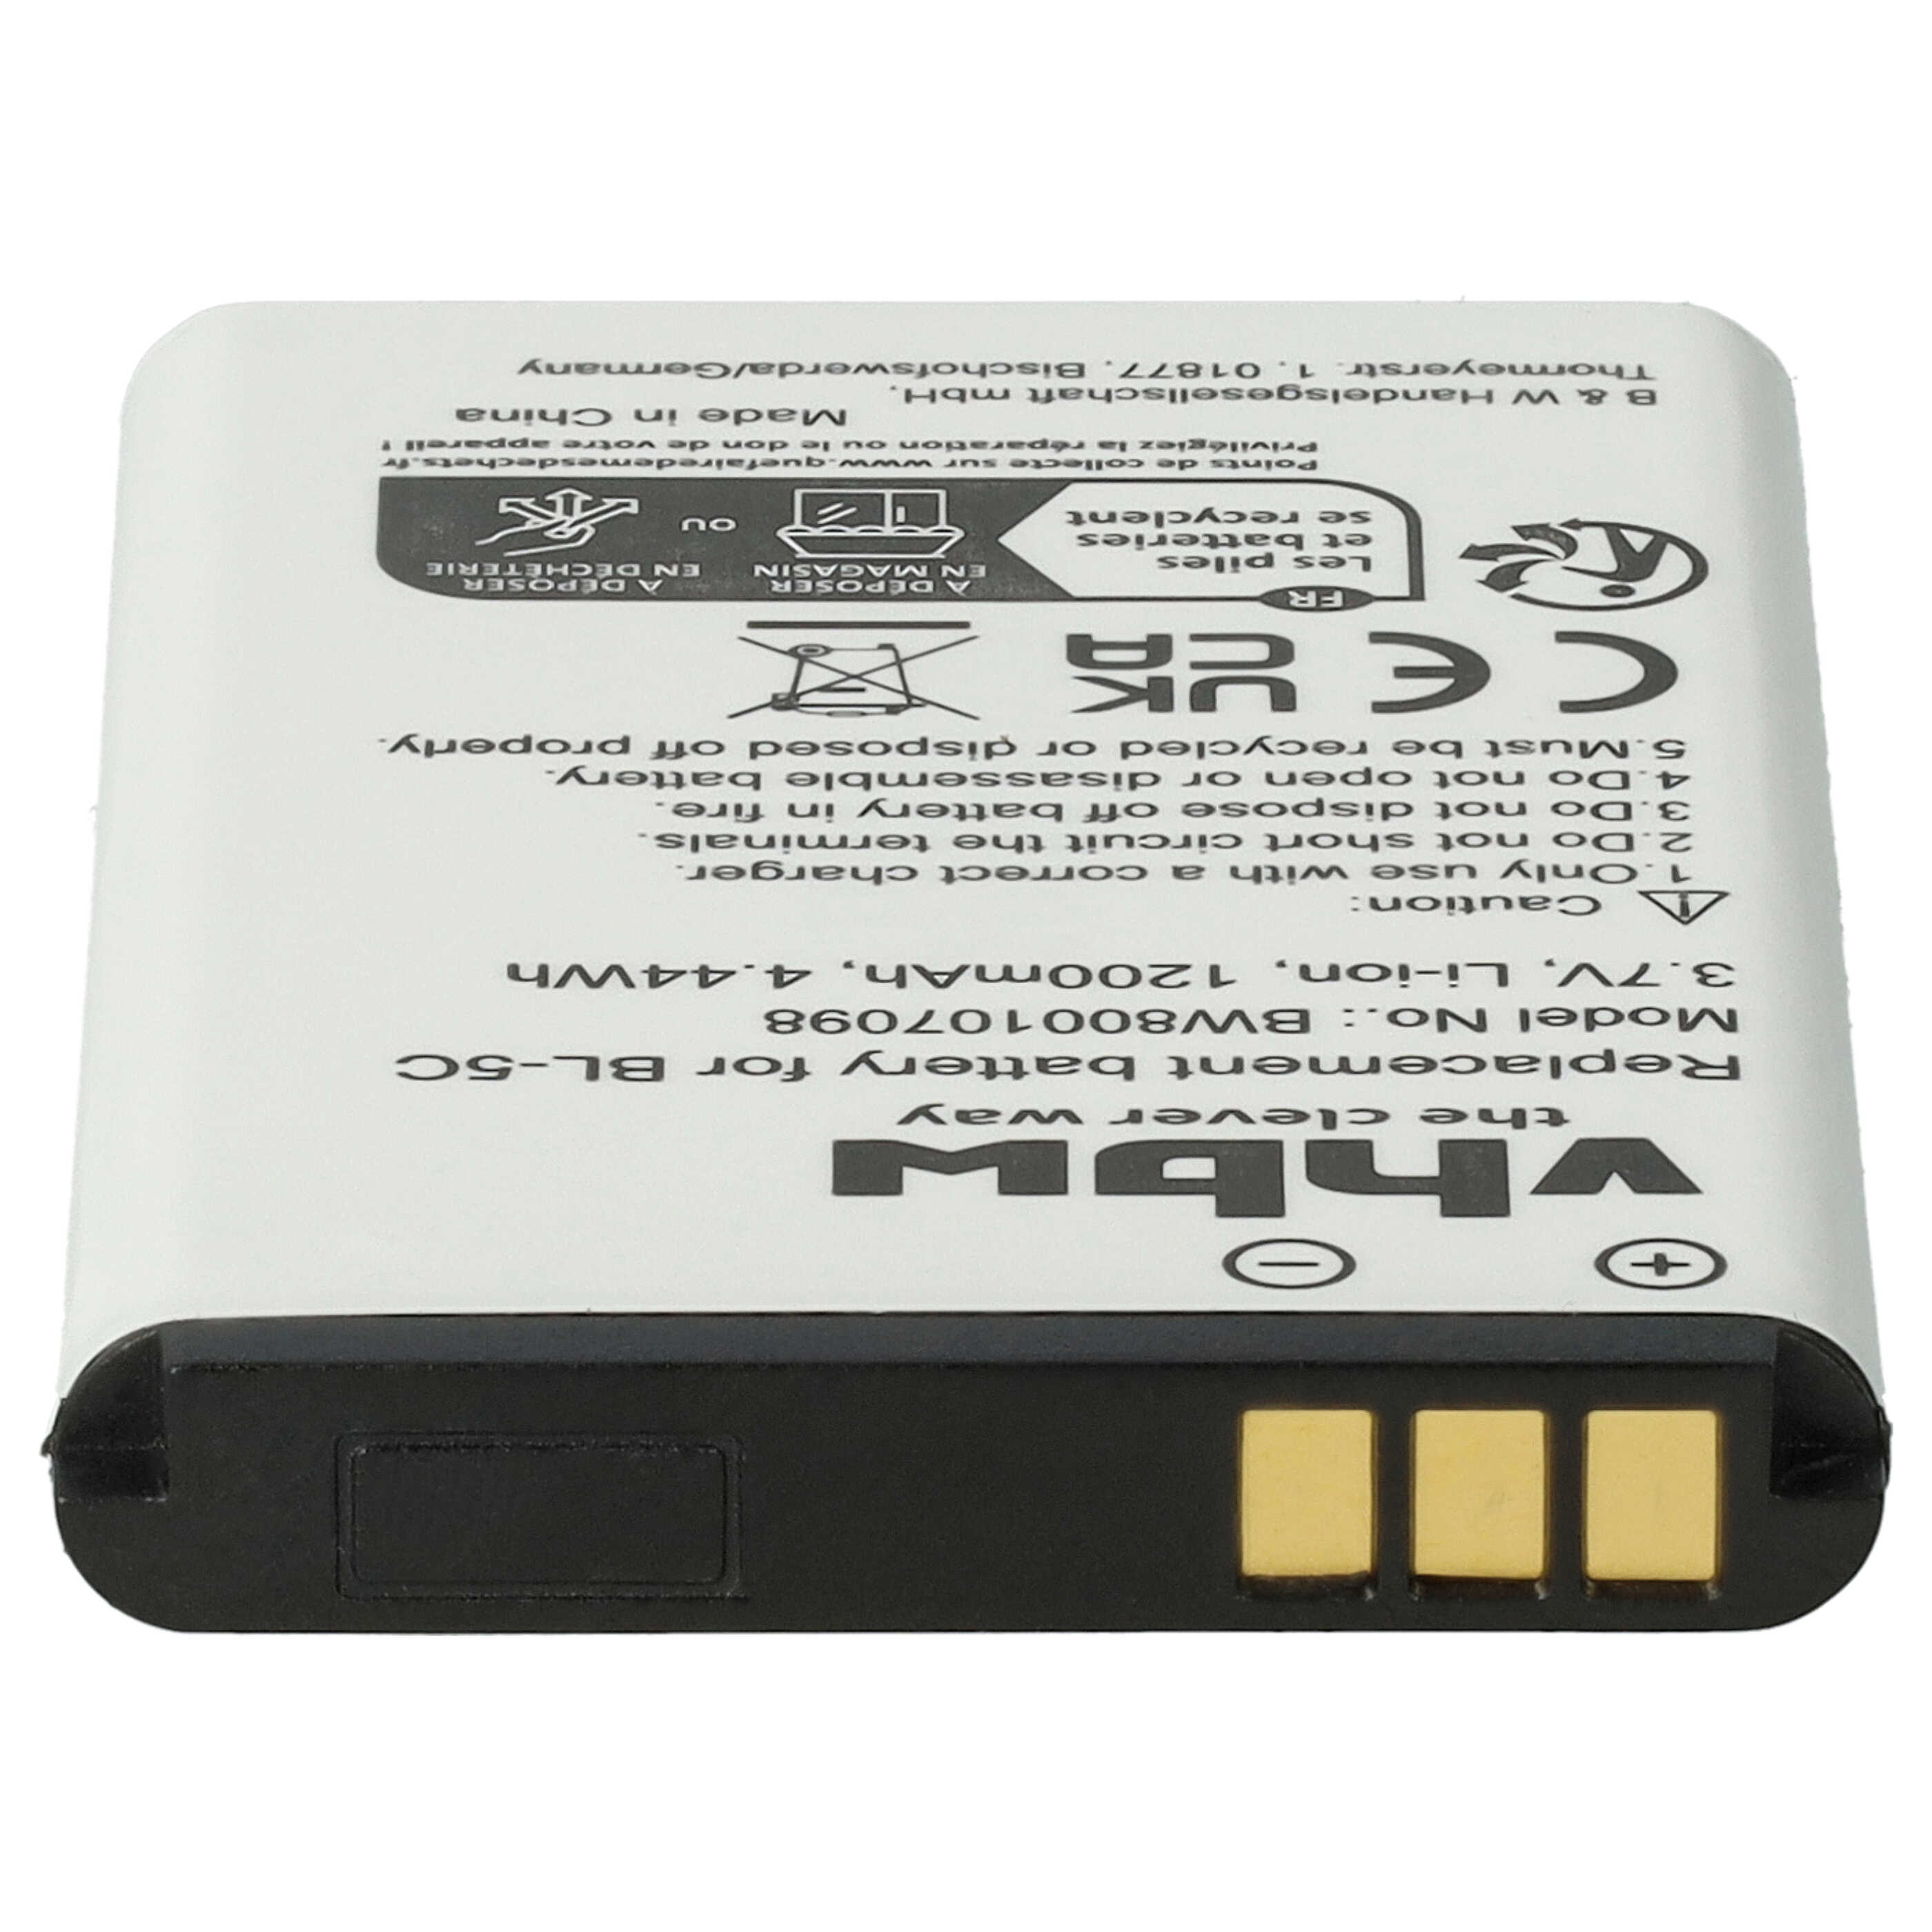 Mobile Phone Battery Replacement for Blu C533457105T - 1200mAh 3.7V Li-Ion